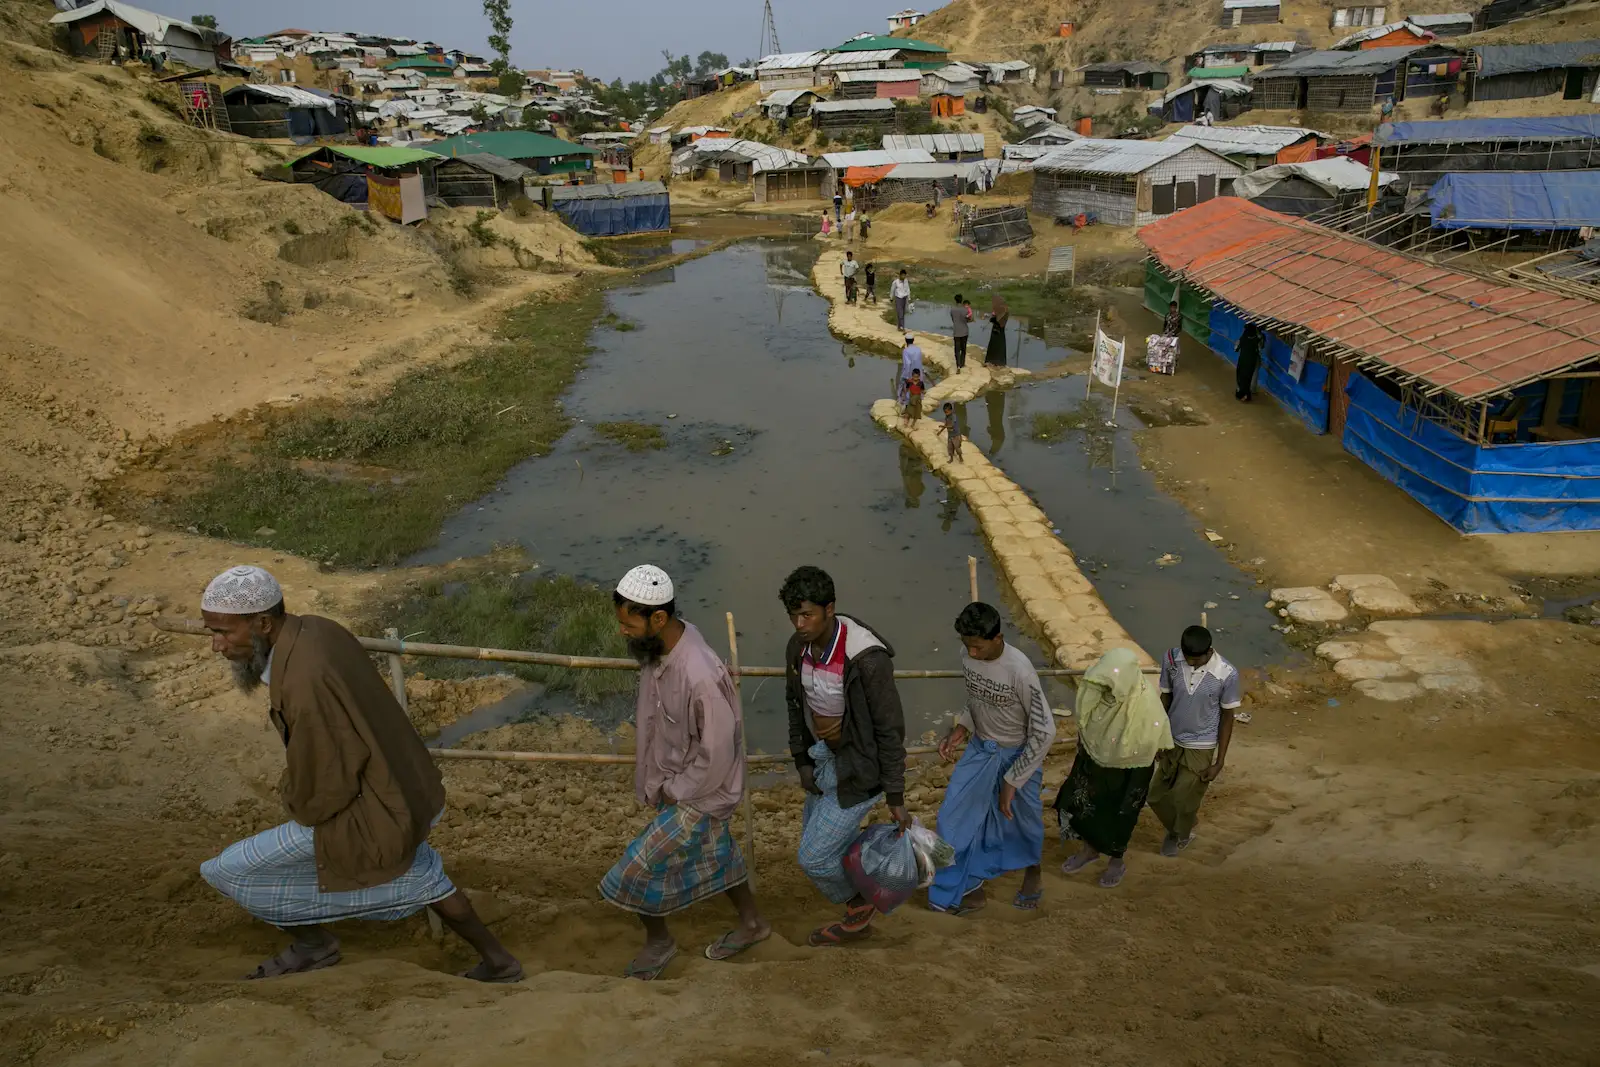 Refugees walking over a path through a pool next to the camp. Five males, and one female are in the foreground climbing a hill